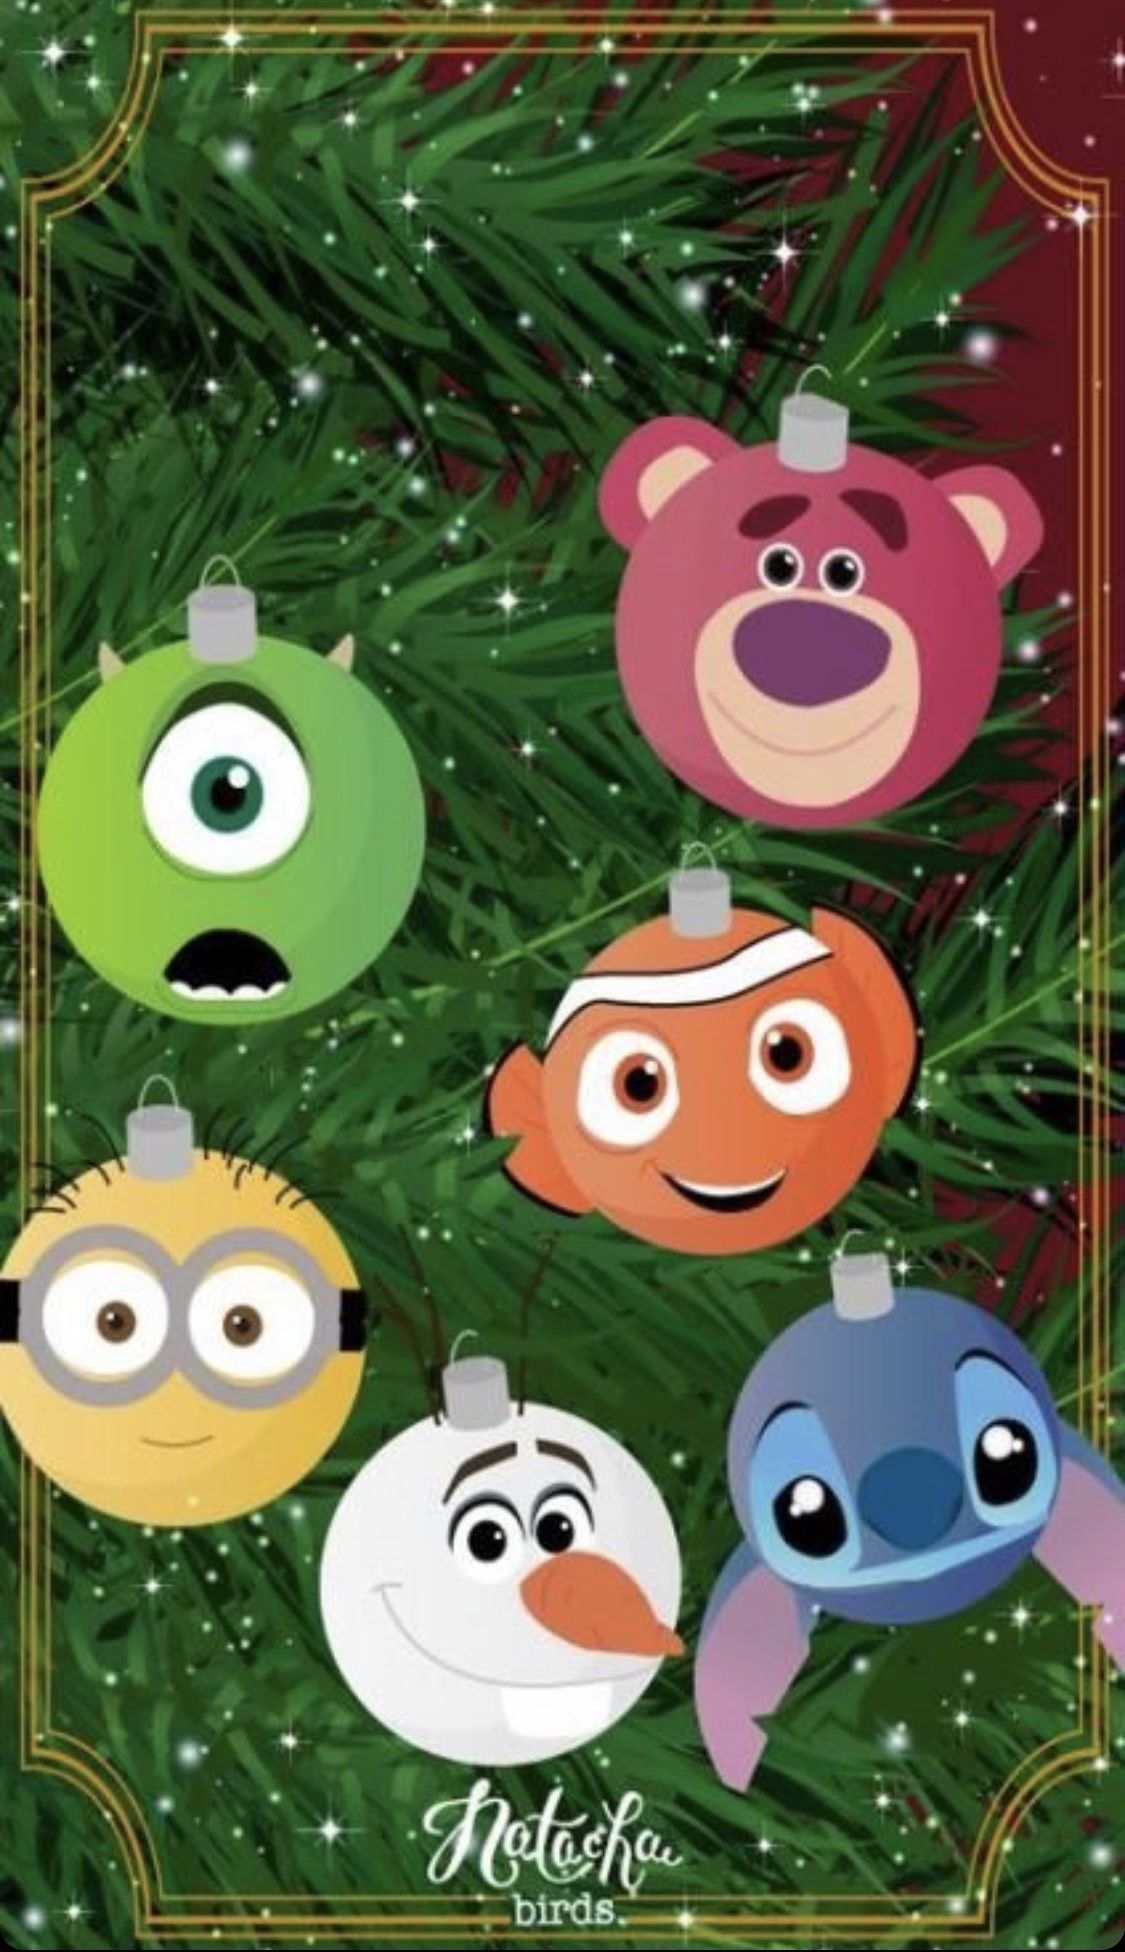 Everything Christmas Day. Wallpaper iphone christmas, Christmas wallpaper, Wallpaper iphone disney